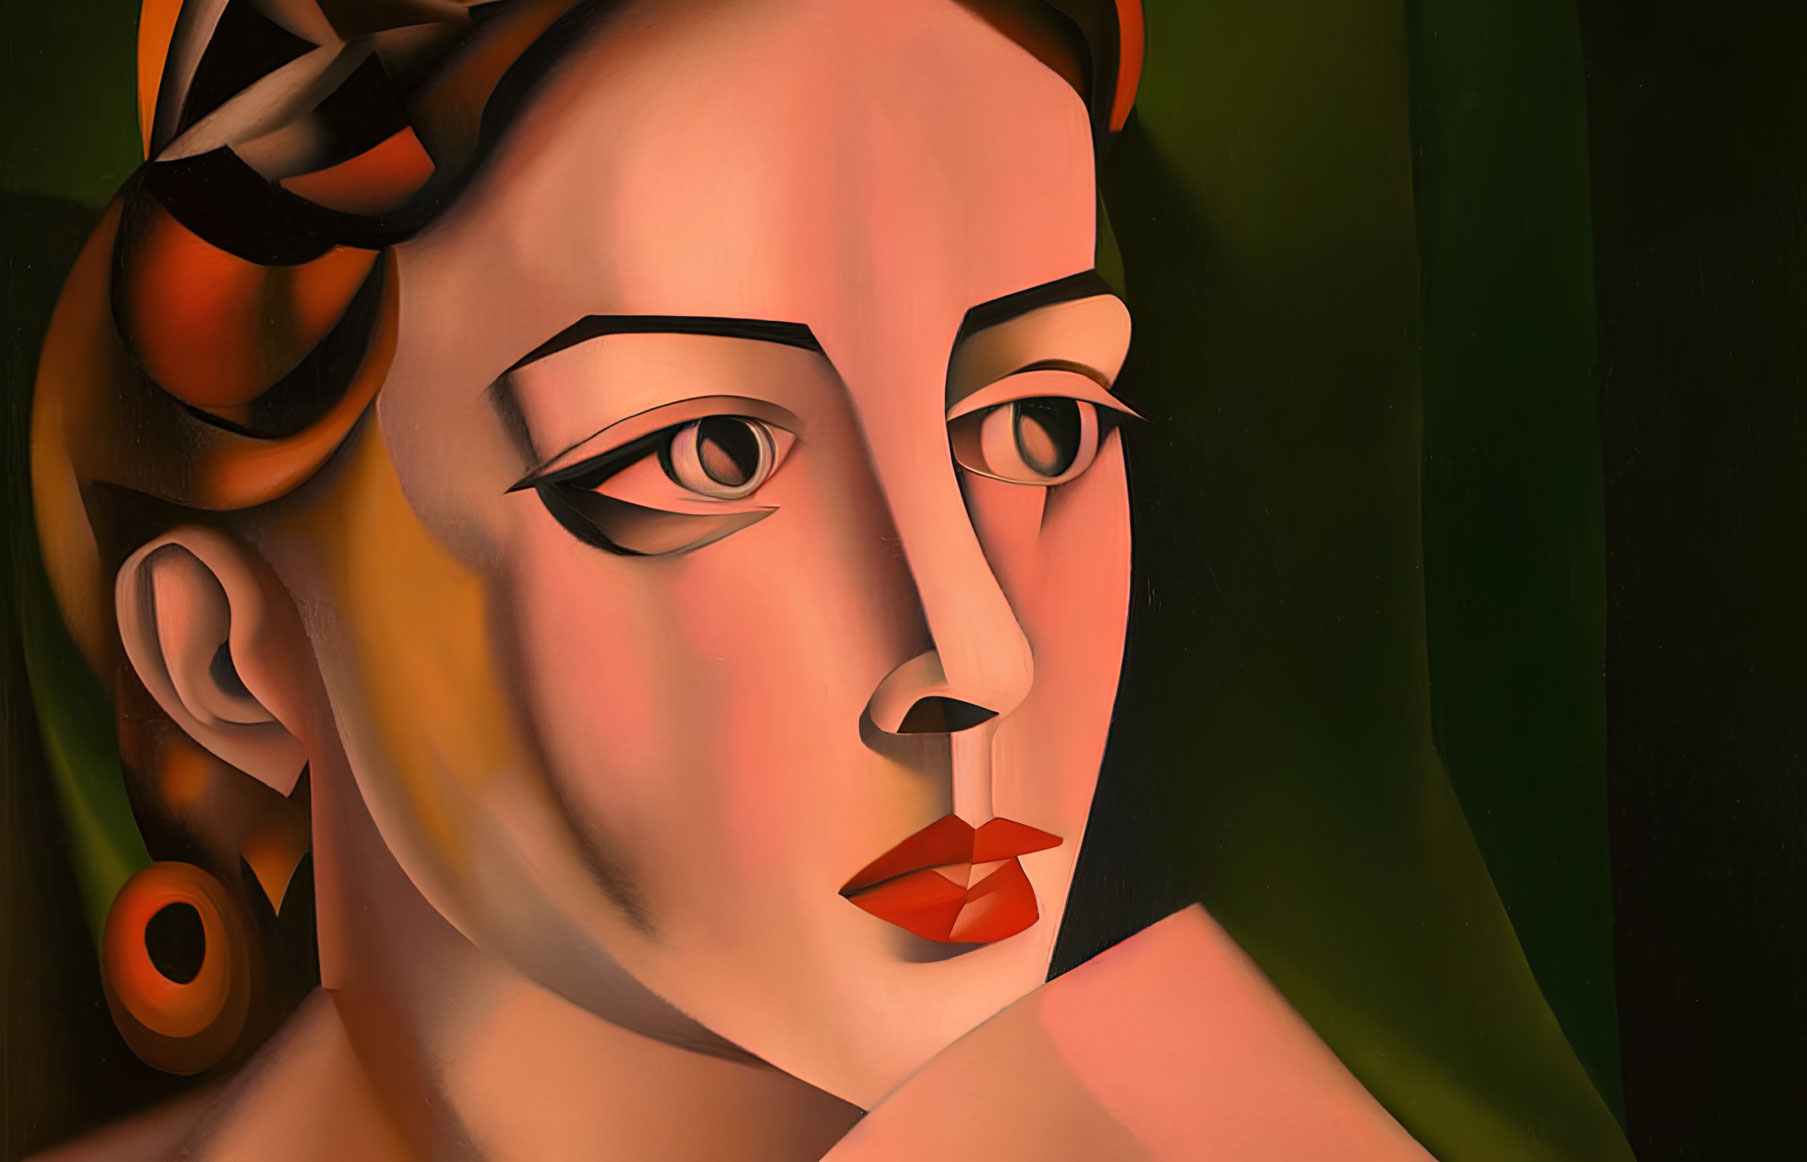 Stylized woman with red lips in close-up painting portrait